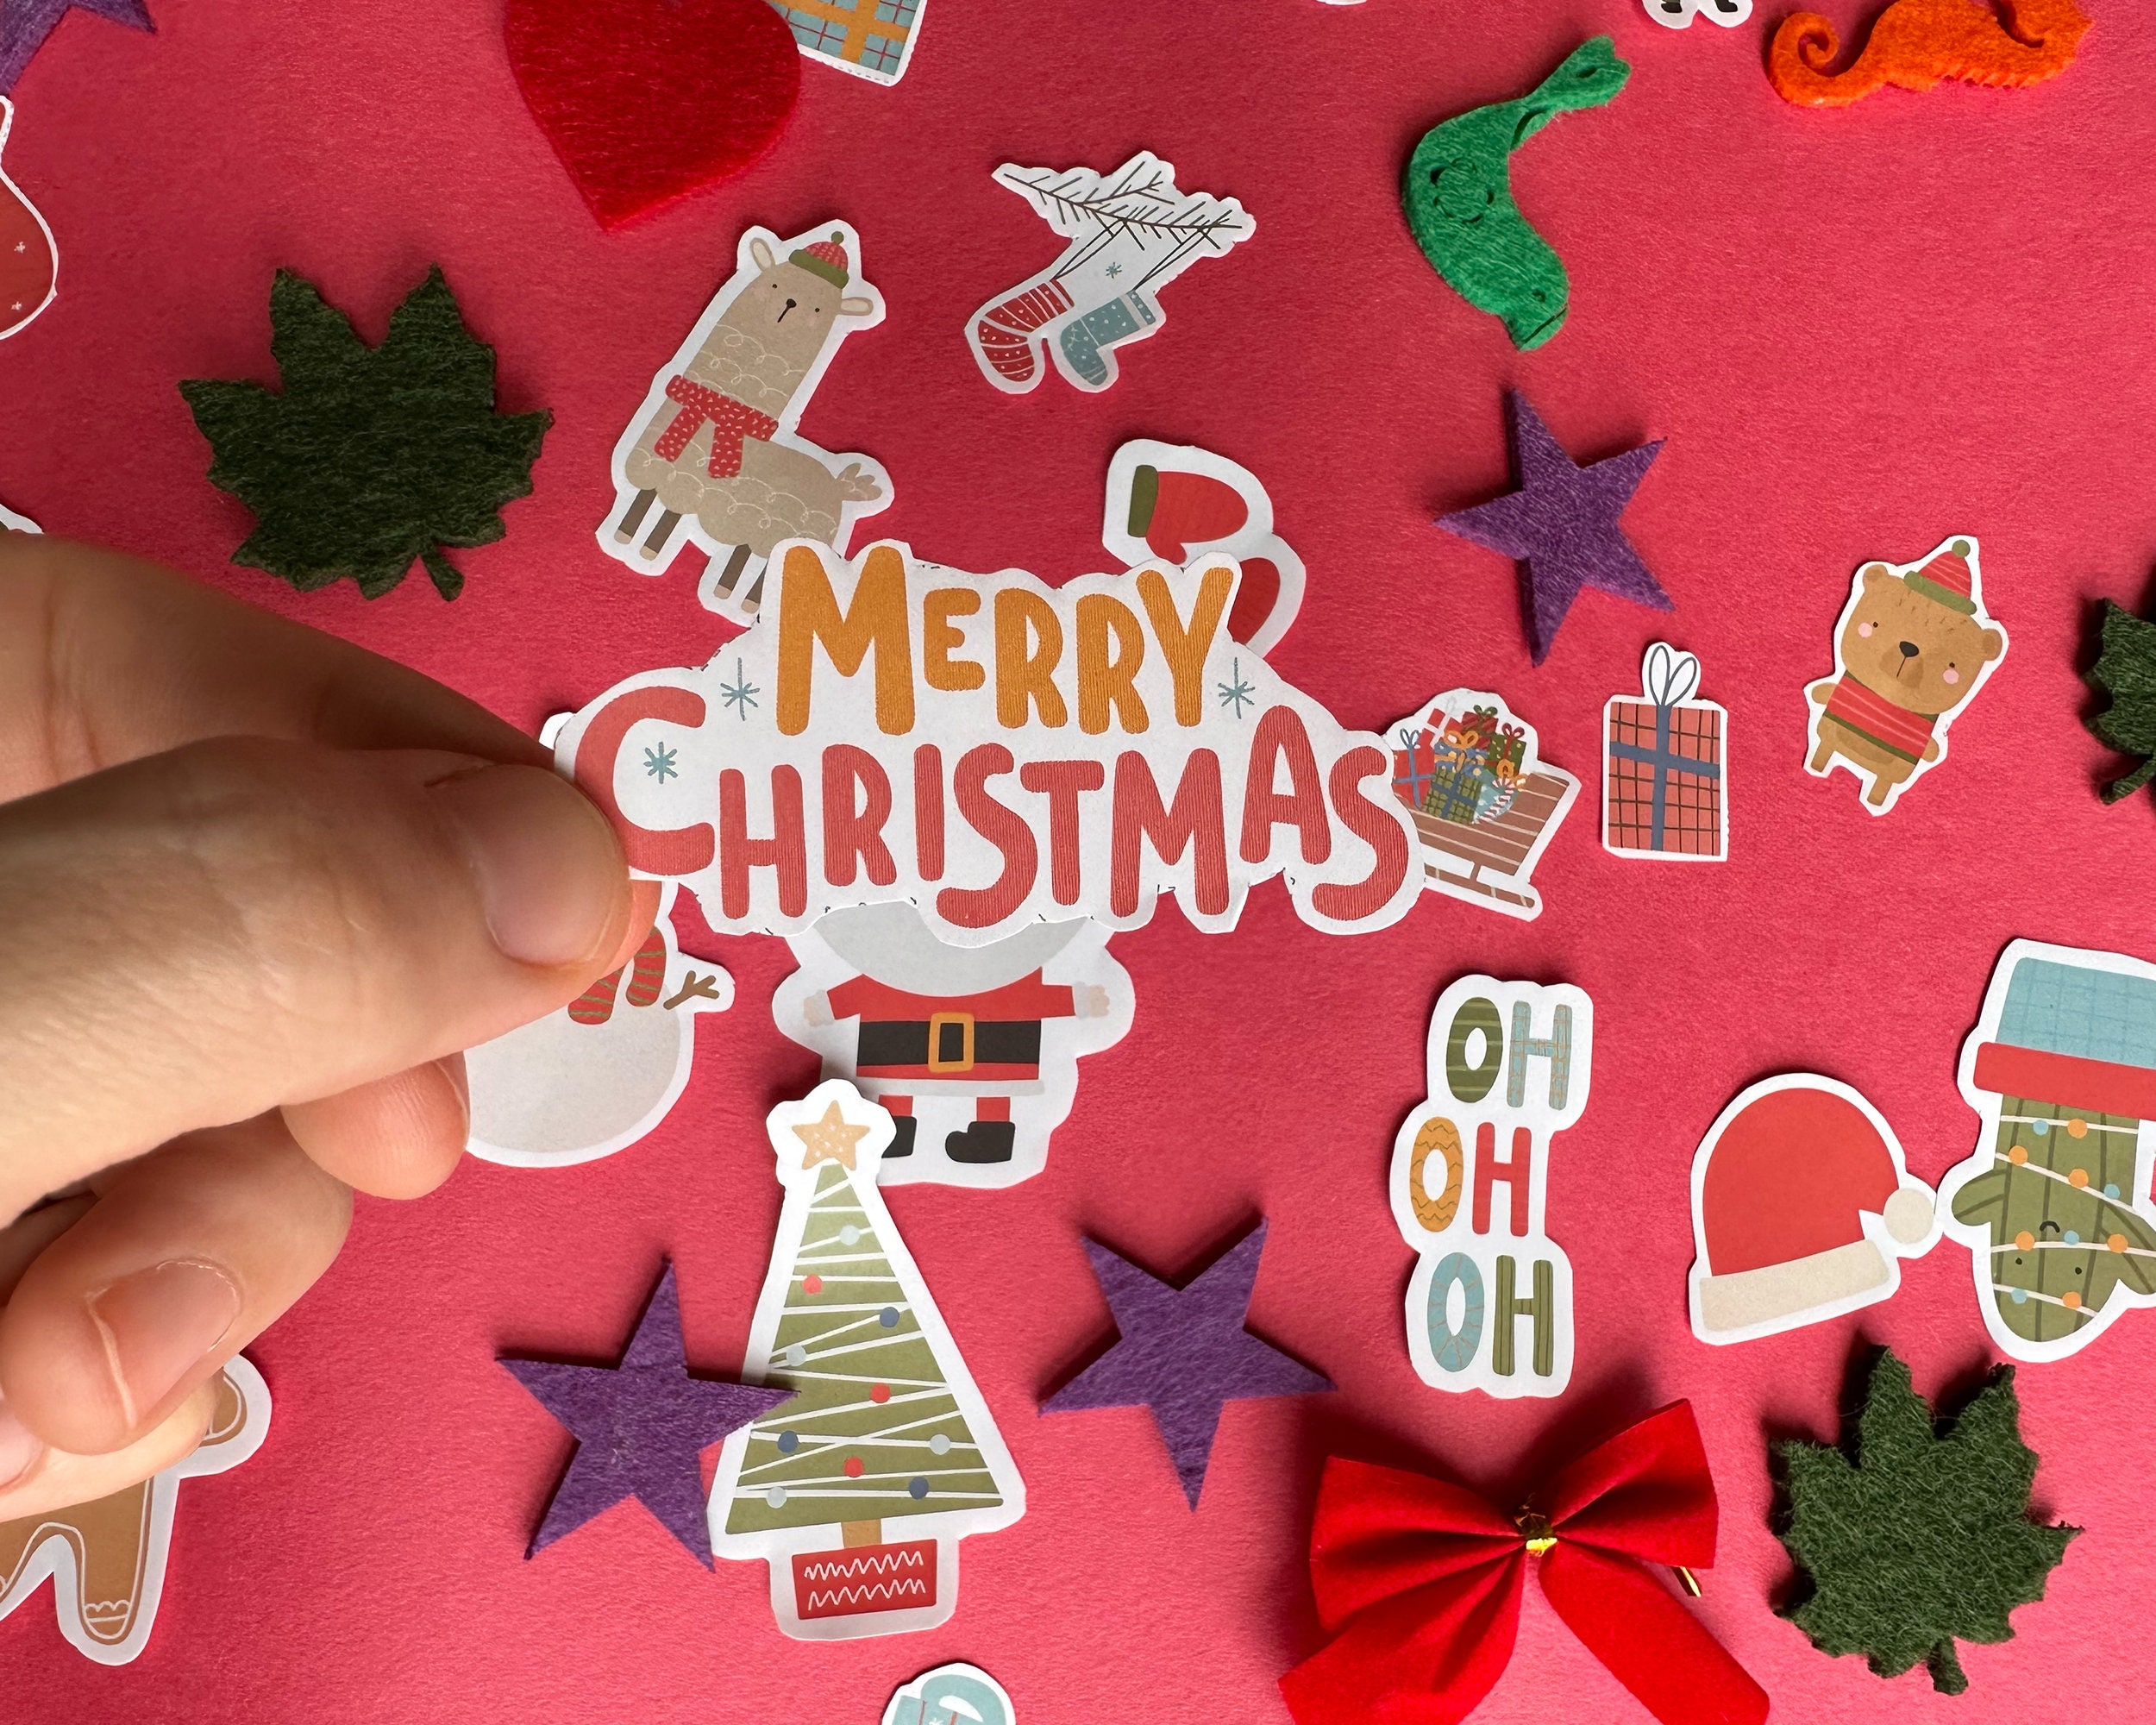 46PCS Christmas Party Stickers: Crafts, Labels Decorations